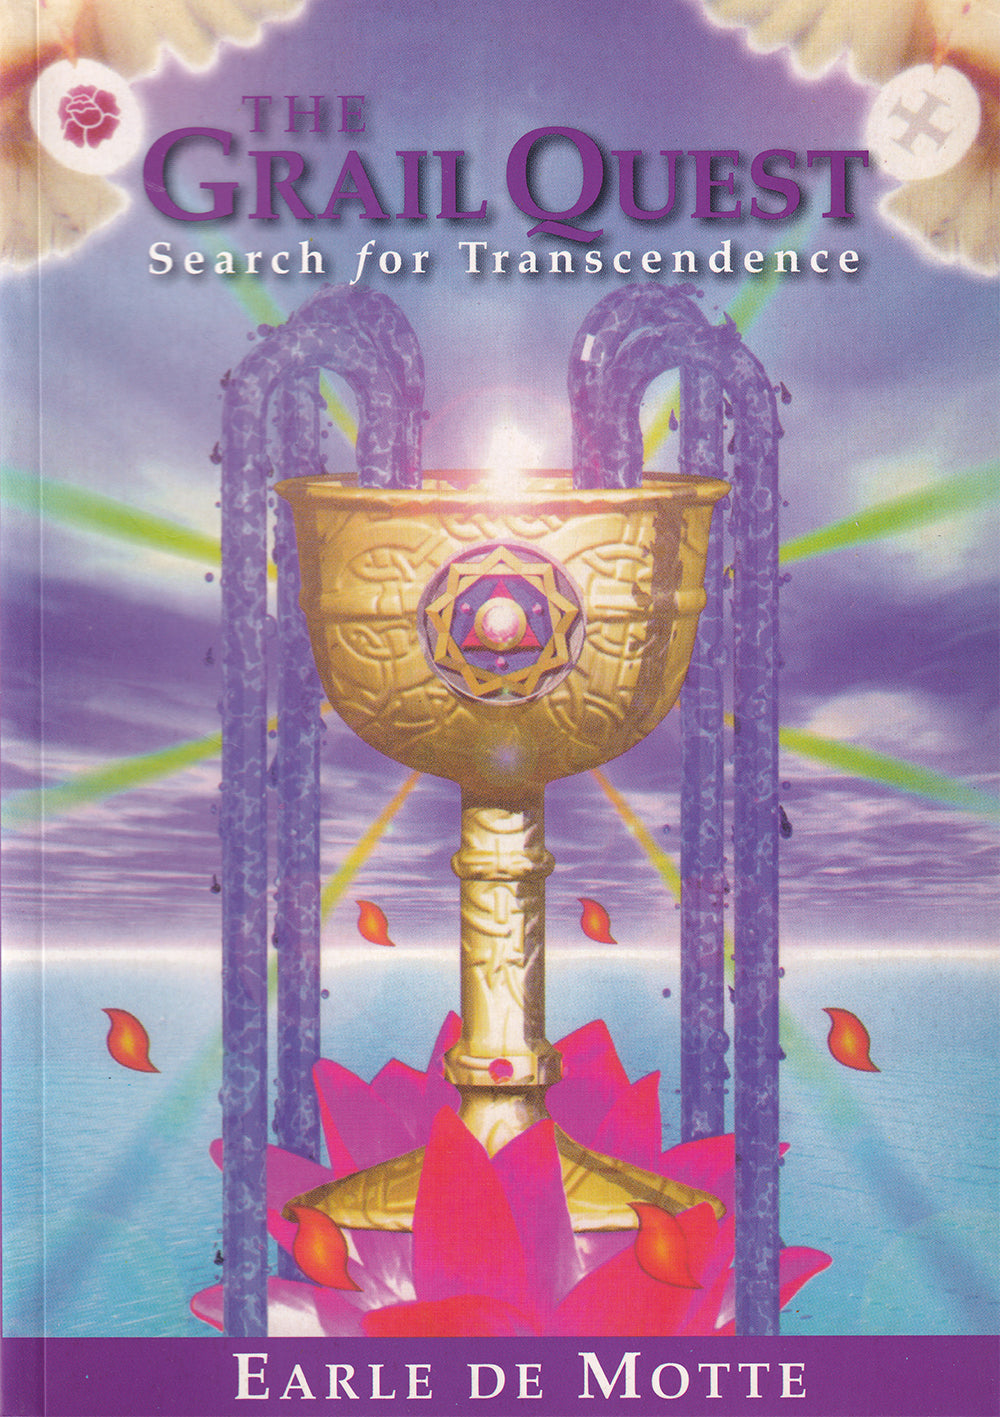 Grail Quest, The - Search for Transcendence